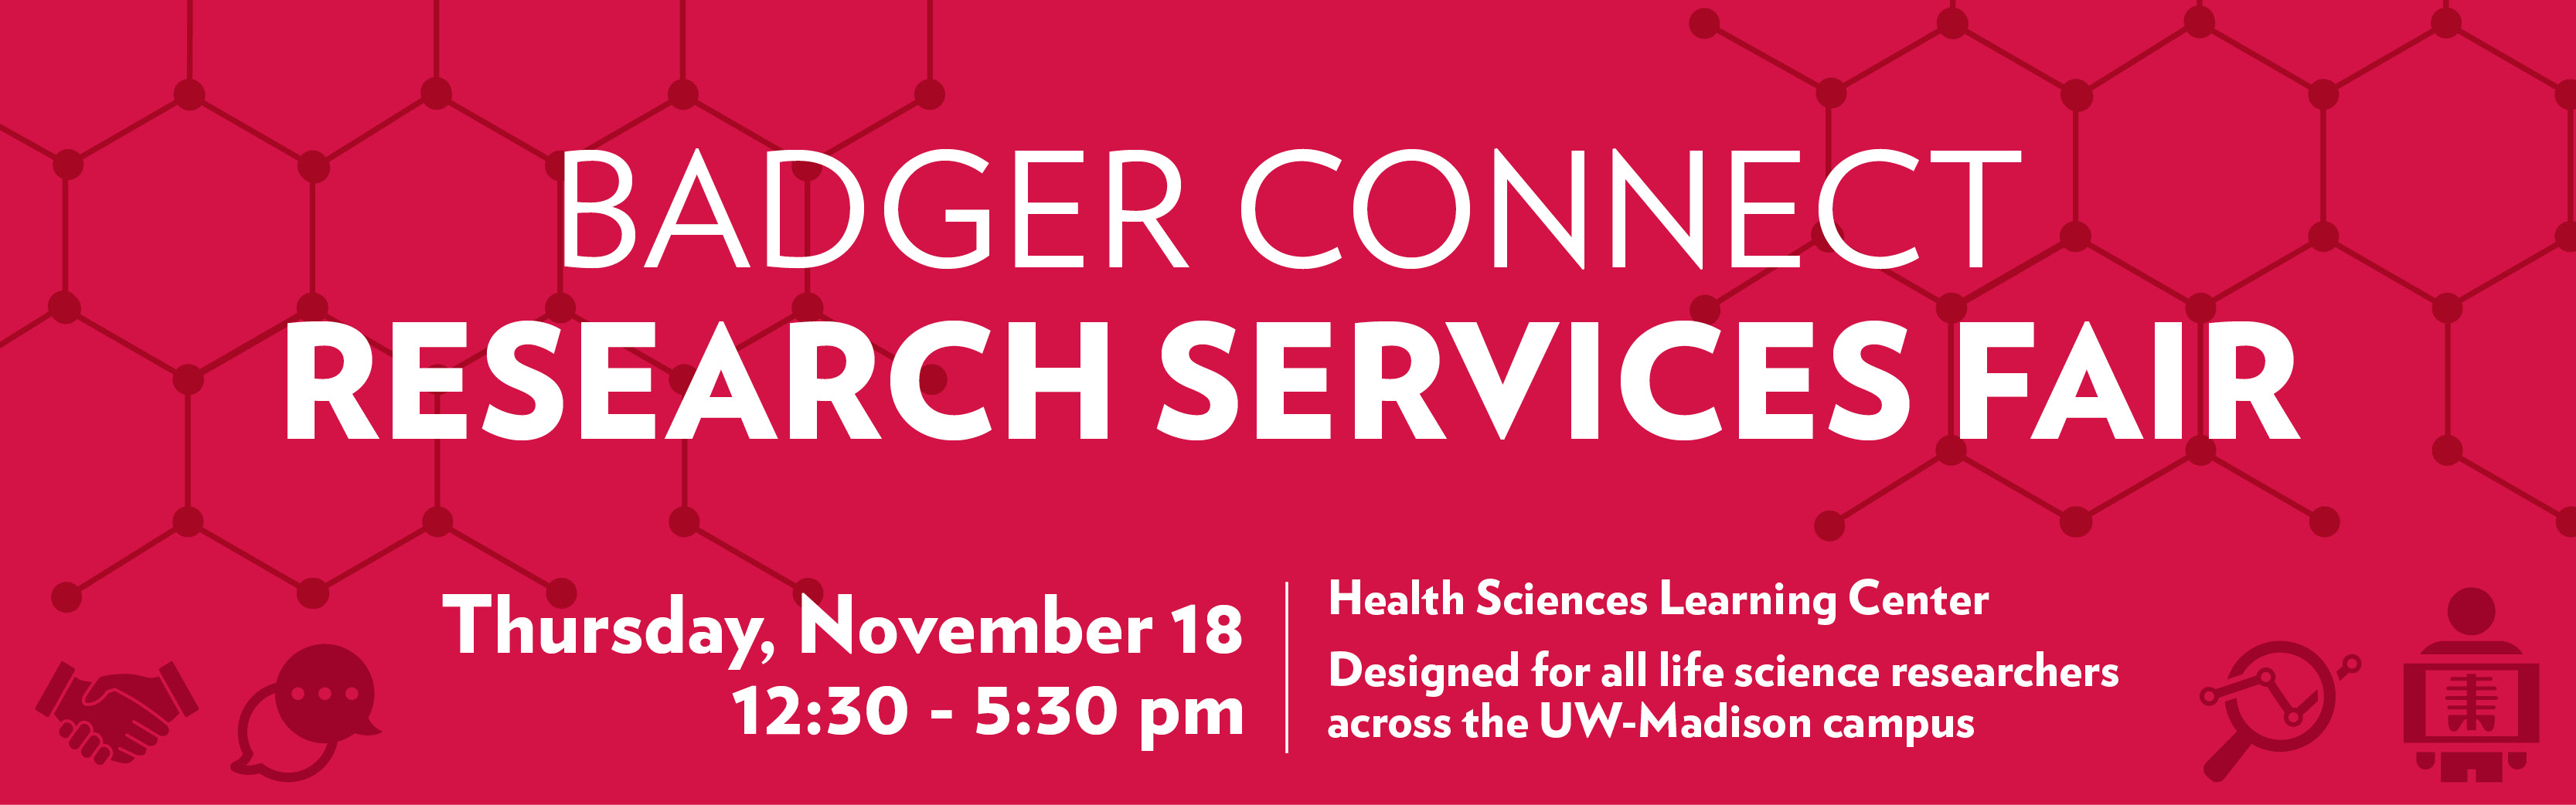 BadgerConnect 2021 Research Services Fair Banner